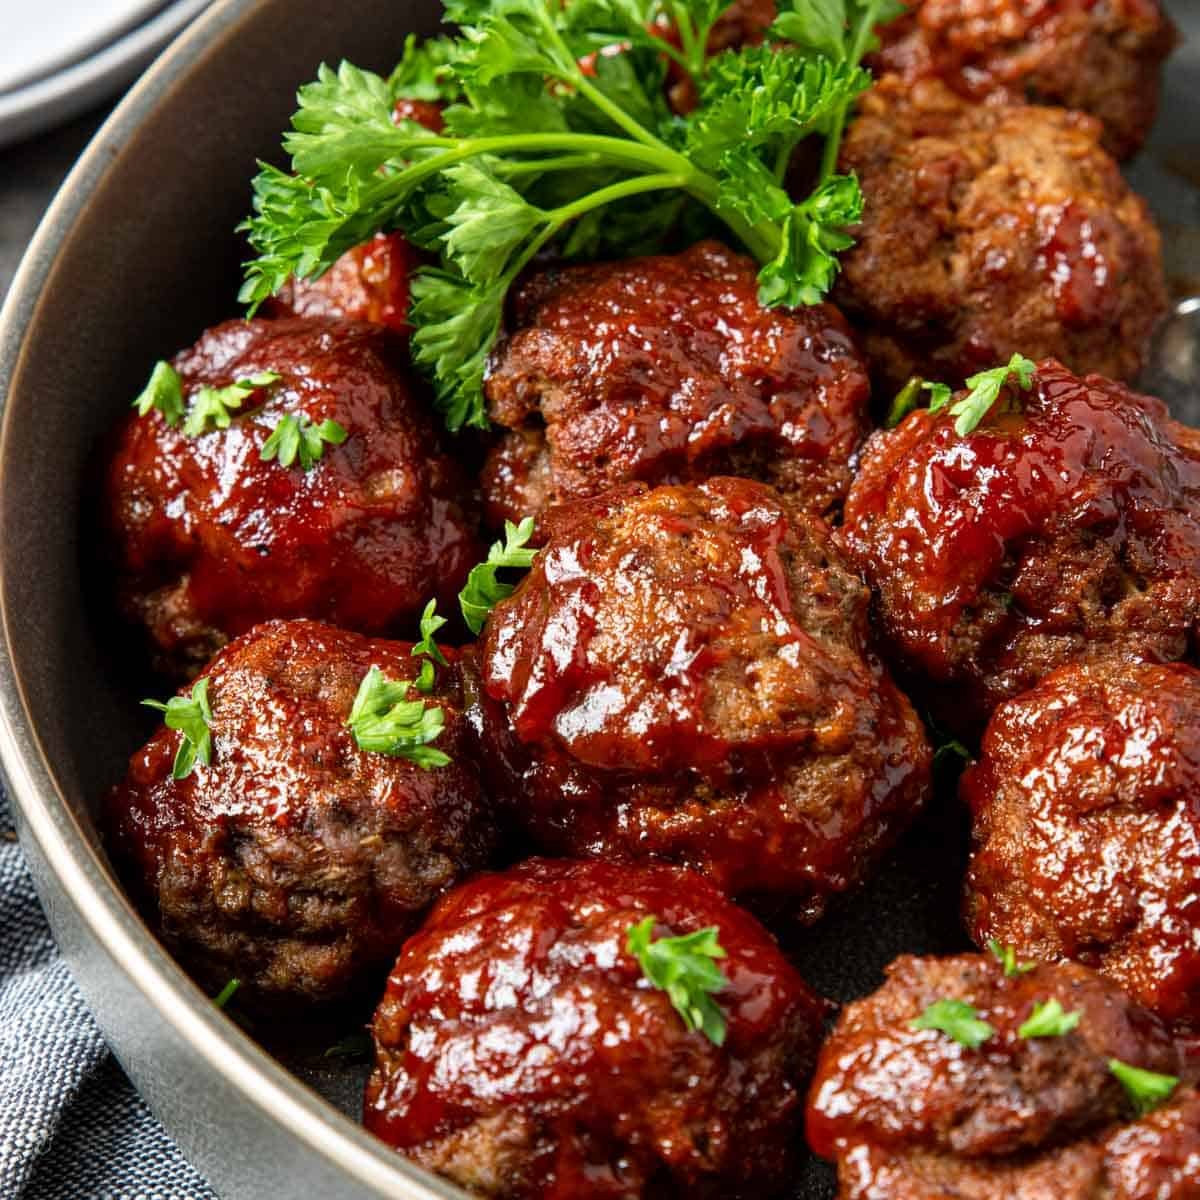 BBQ Meatballs in a bowl garnished with parsley